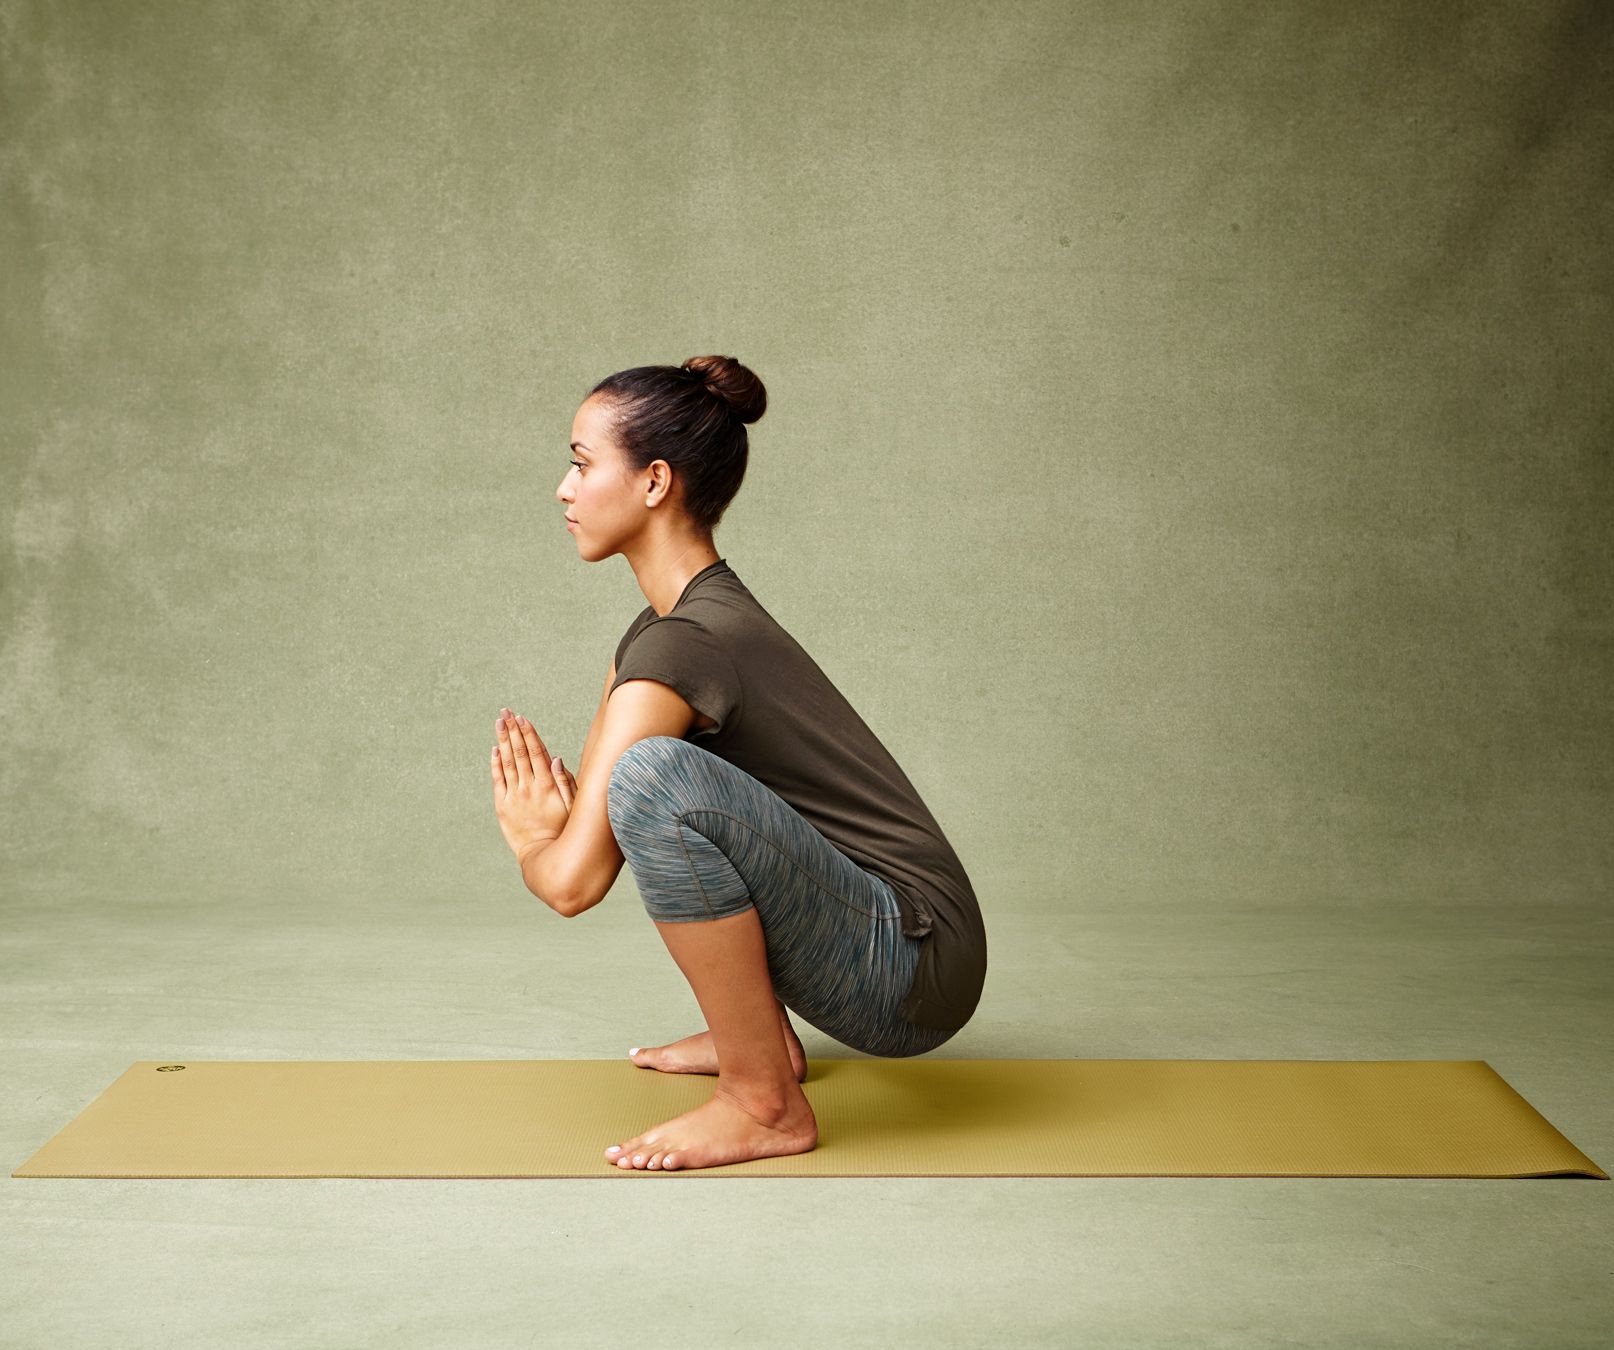 Yoga poses to relieve anxiety: Gentle asanas to try